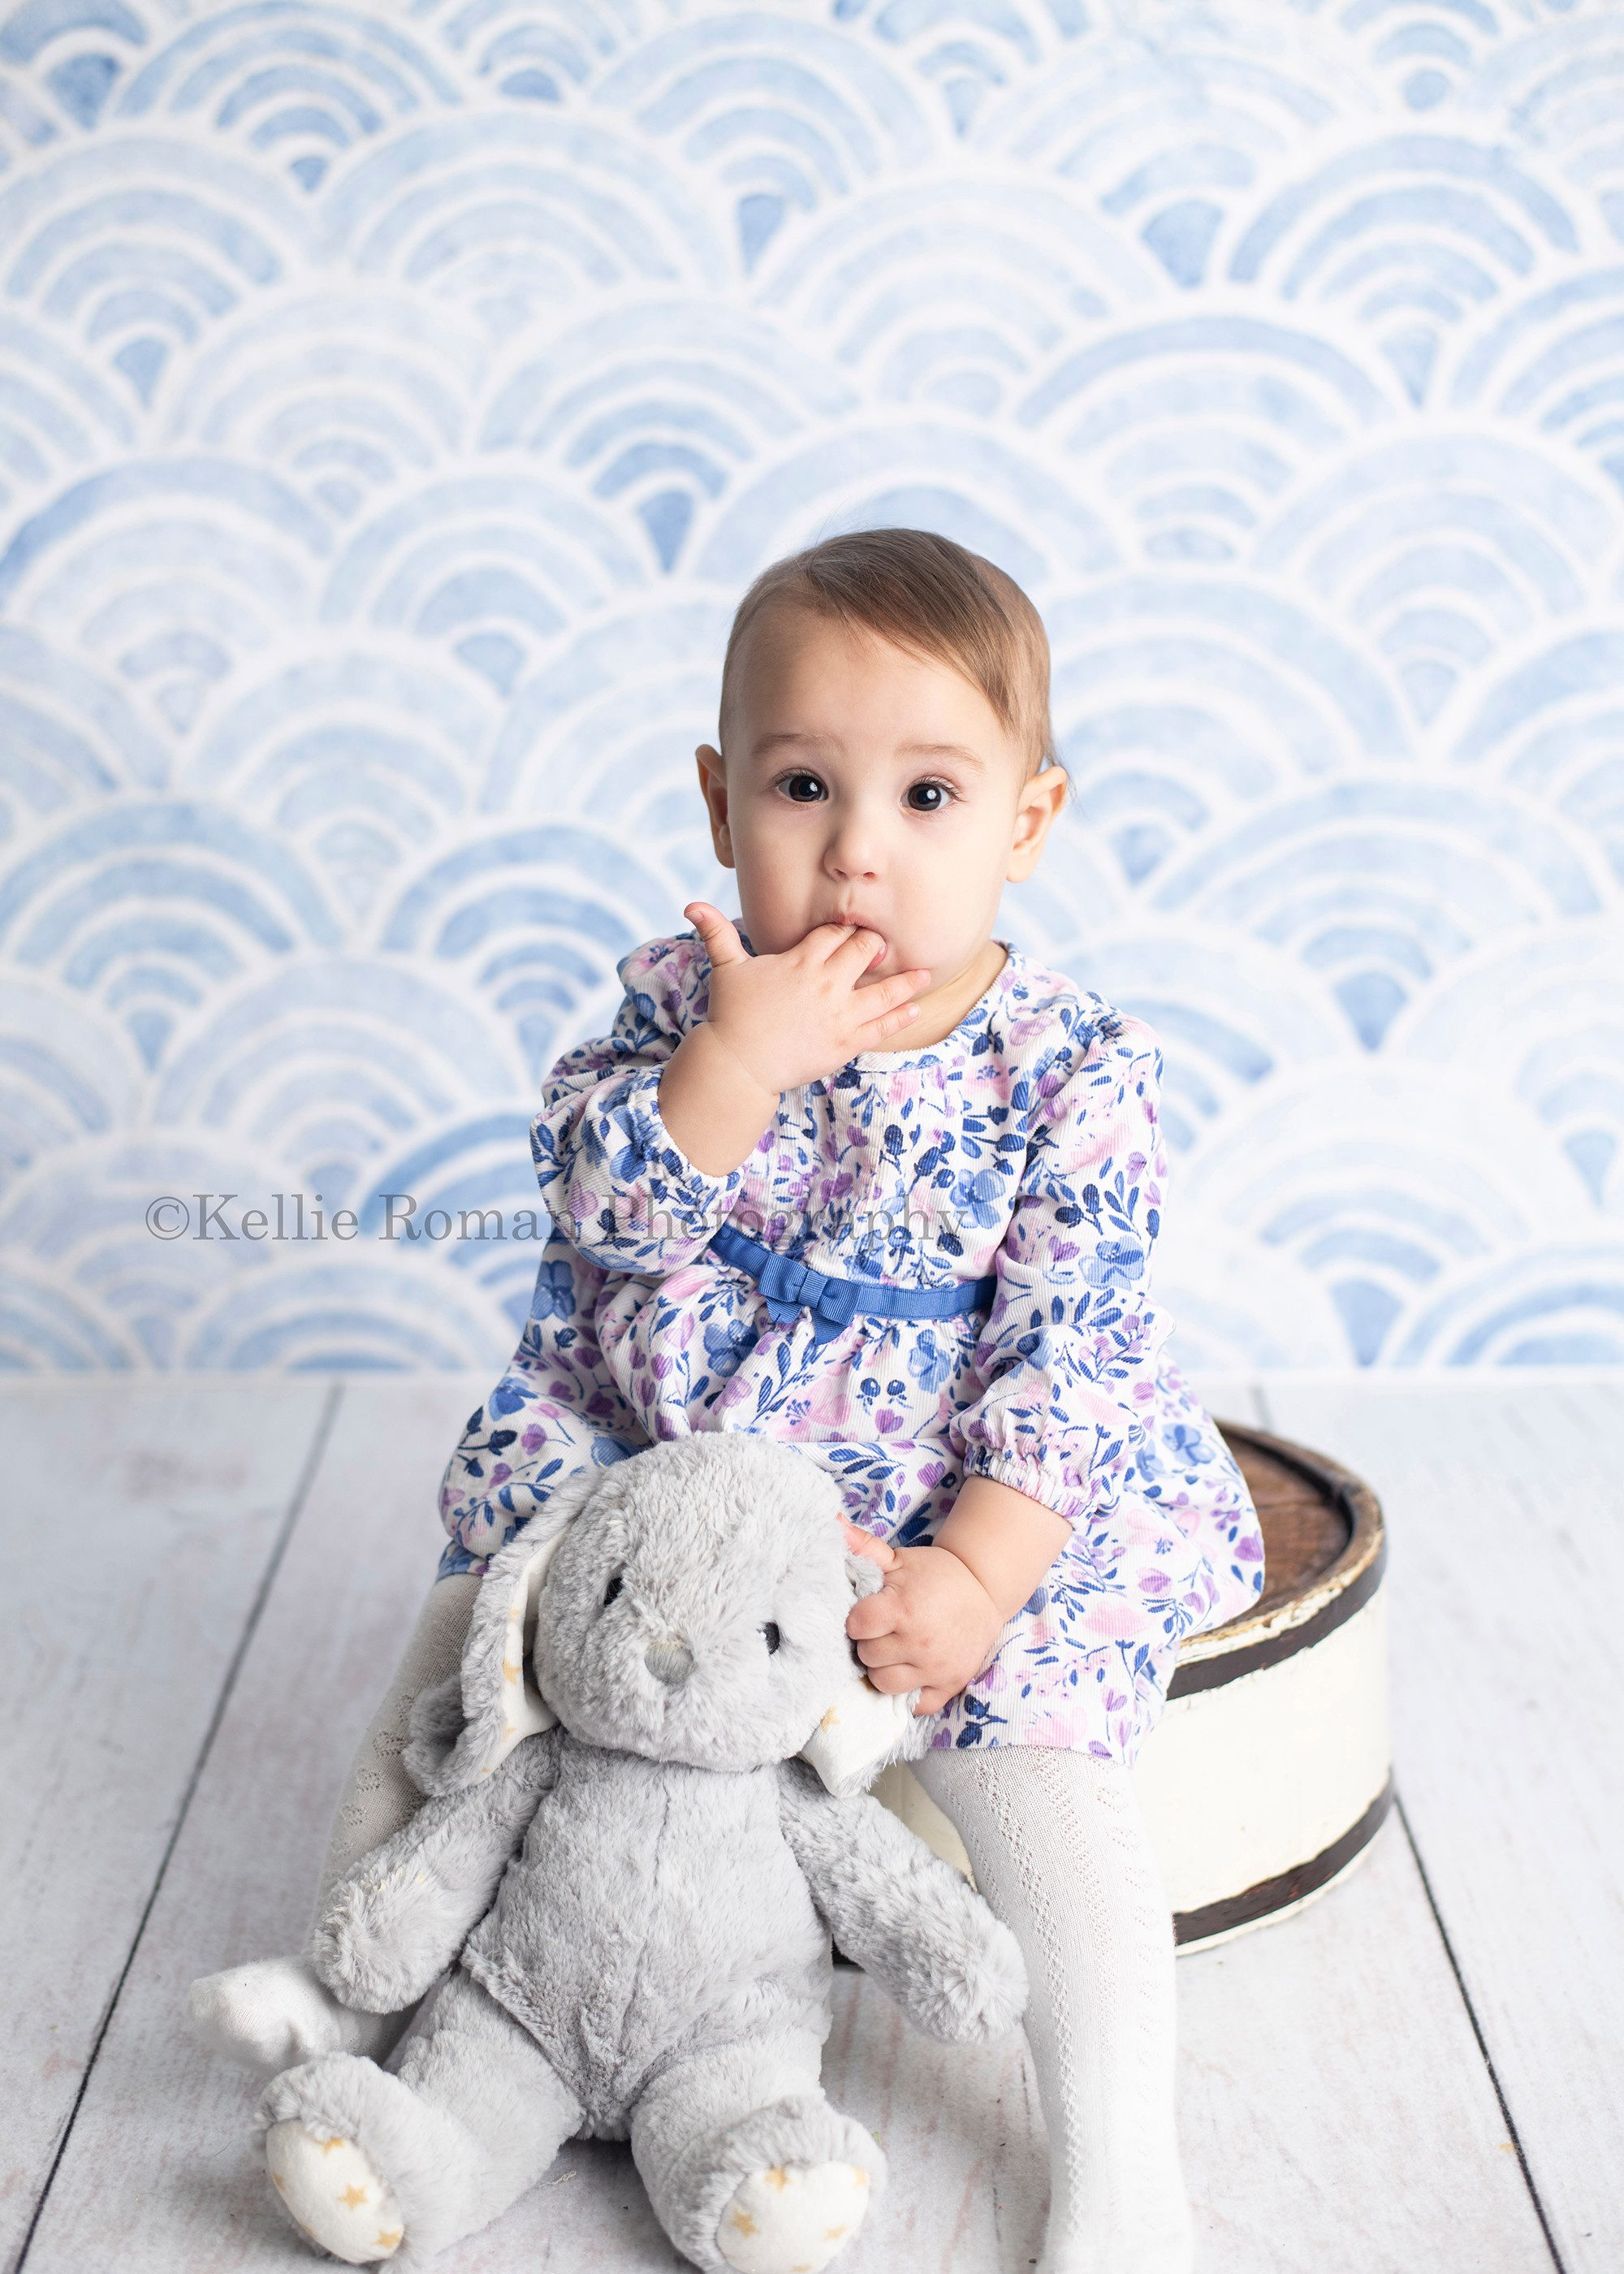 dig in a one year old girl in a Milwaukee photography studio swearing a blue and purple dress sitting on a white tub infant of a blue backdrop. She has her fingers in her mouth and is holding a grey bunny. One year old milestone session